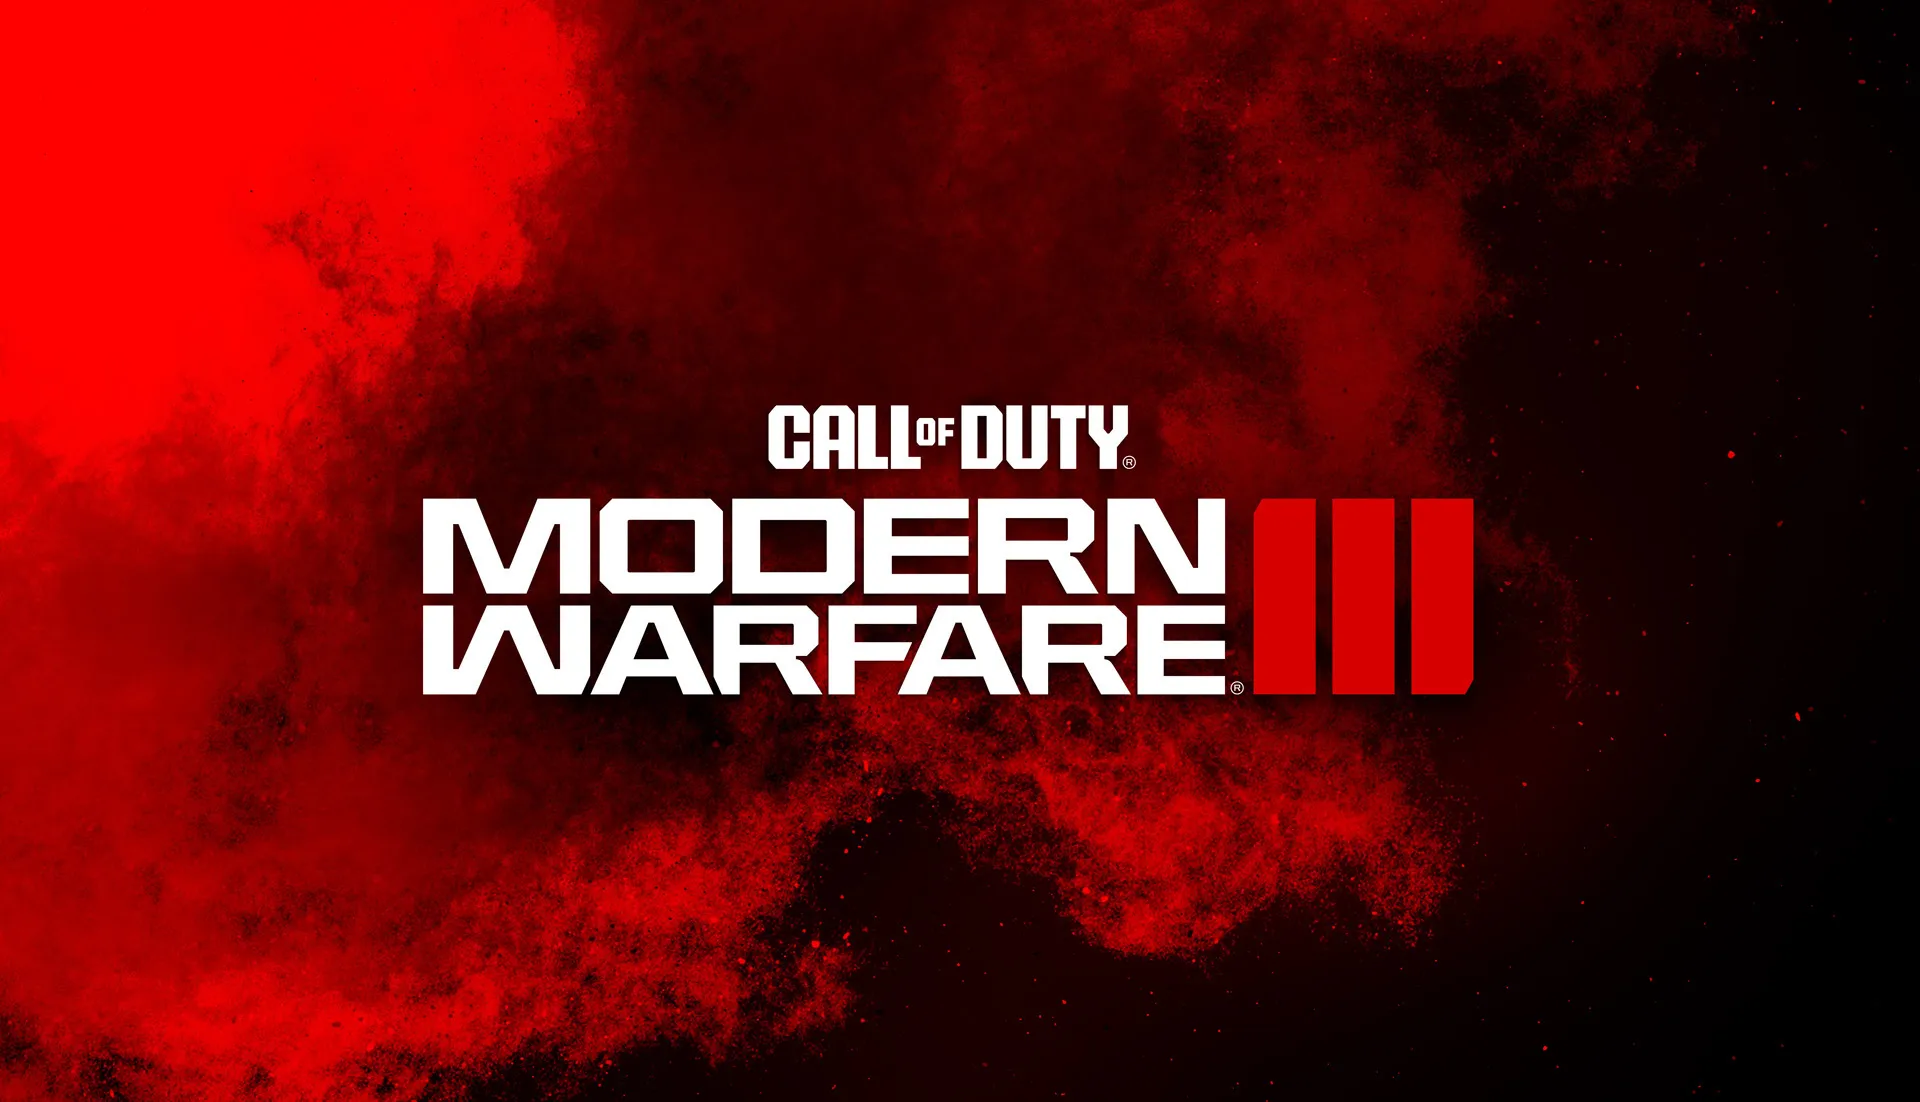 Modern Warfare 3 leak confirms Vault Edition exclusive content will include 4 operator skins and